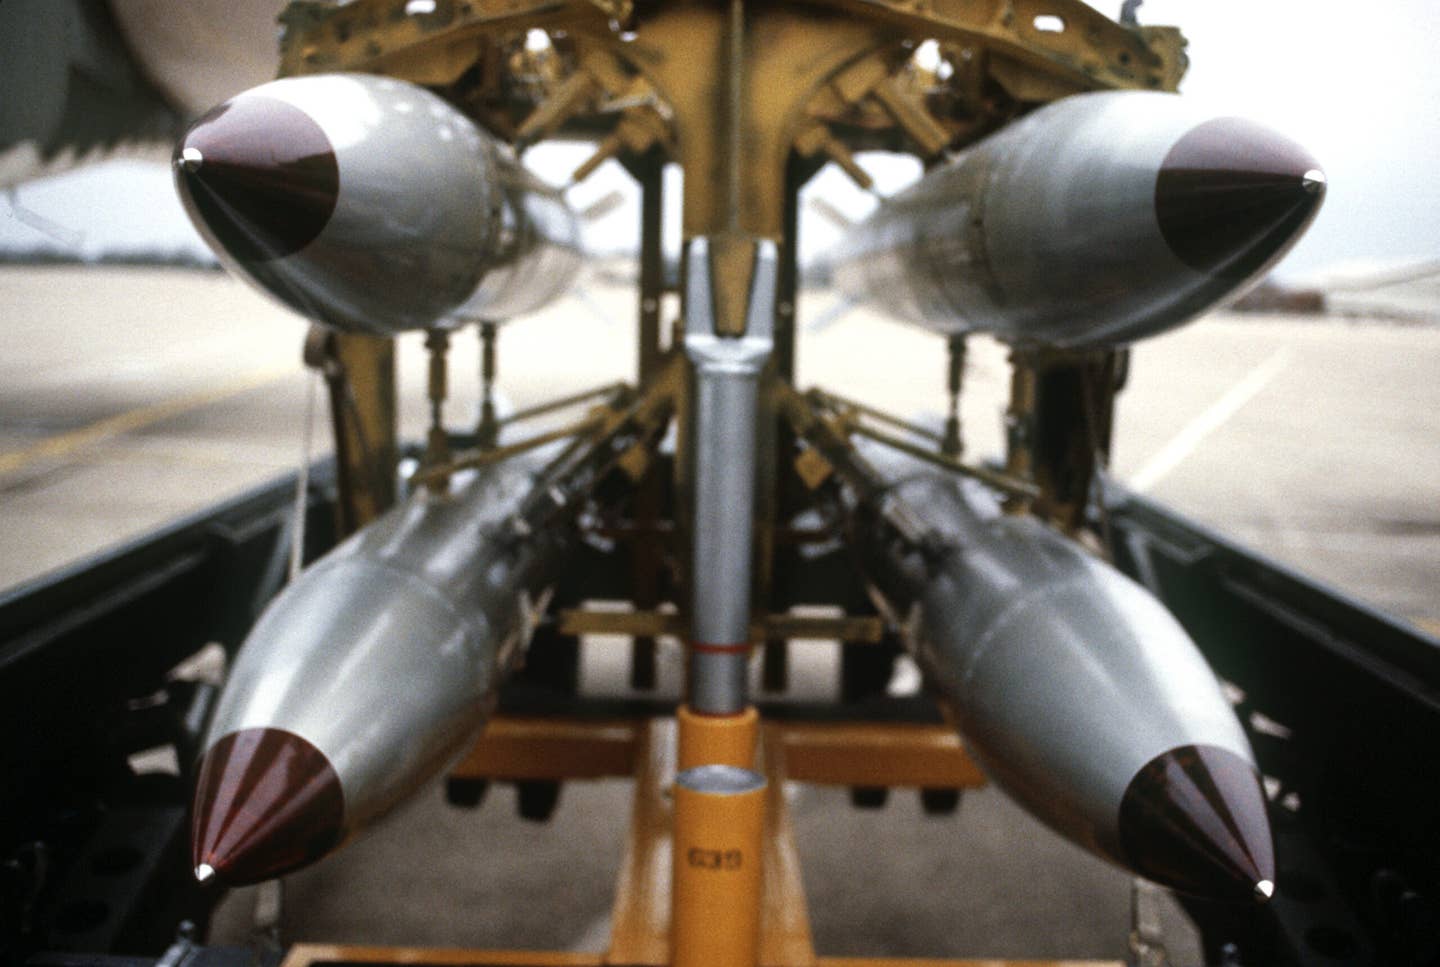 A frontal view of four B61 nuclear gravity bombs on a bomb cart. <em>Credit: Defense Department photo by SSGT PHIL SCHMITTEN&nbsp;</em>